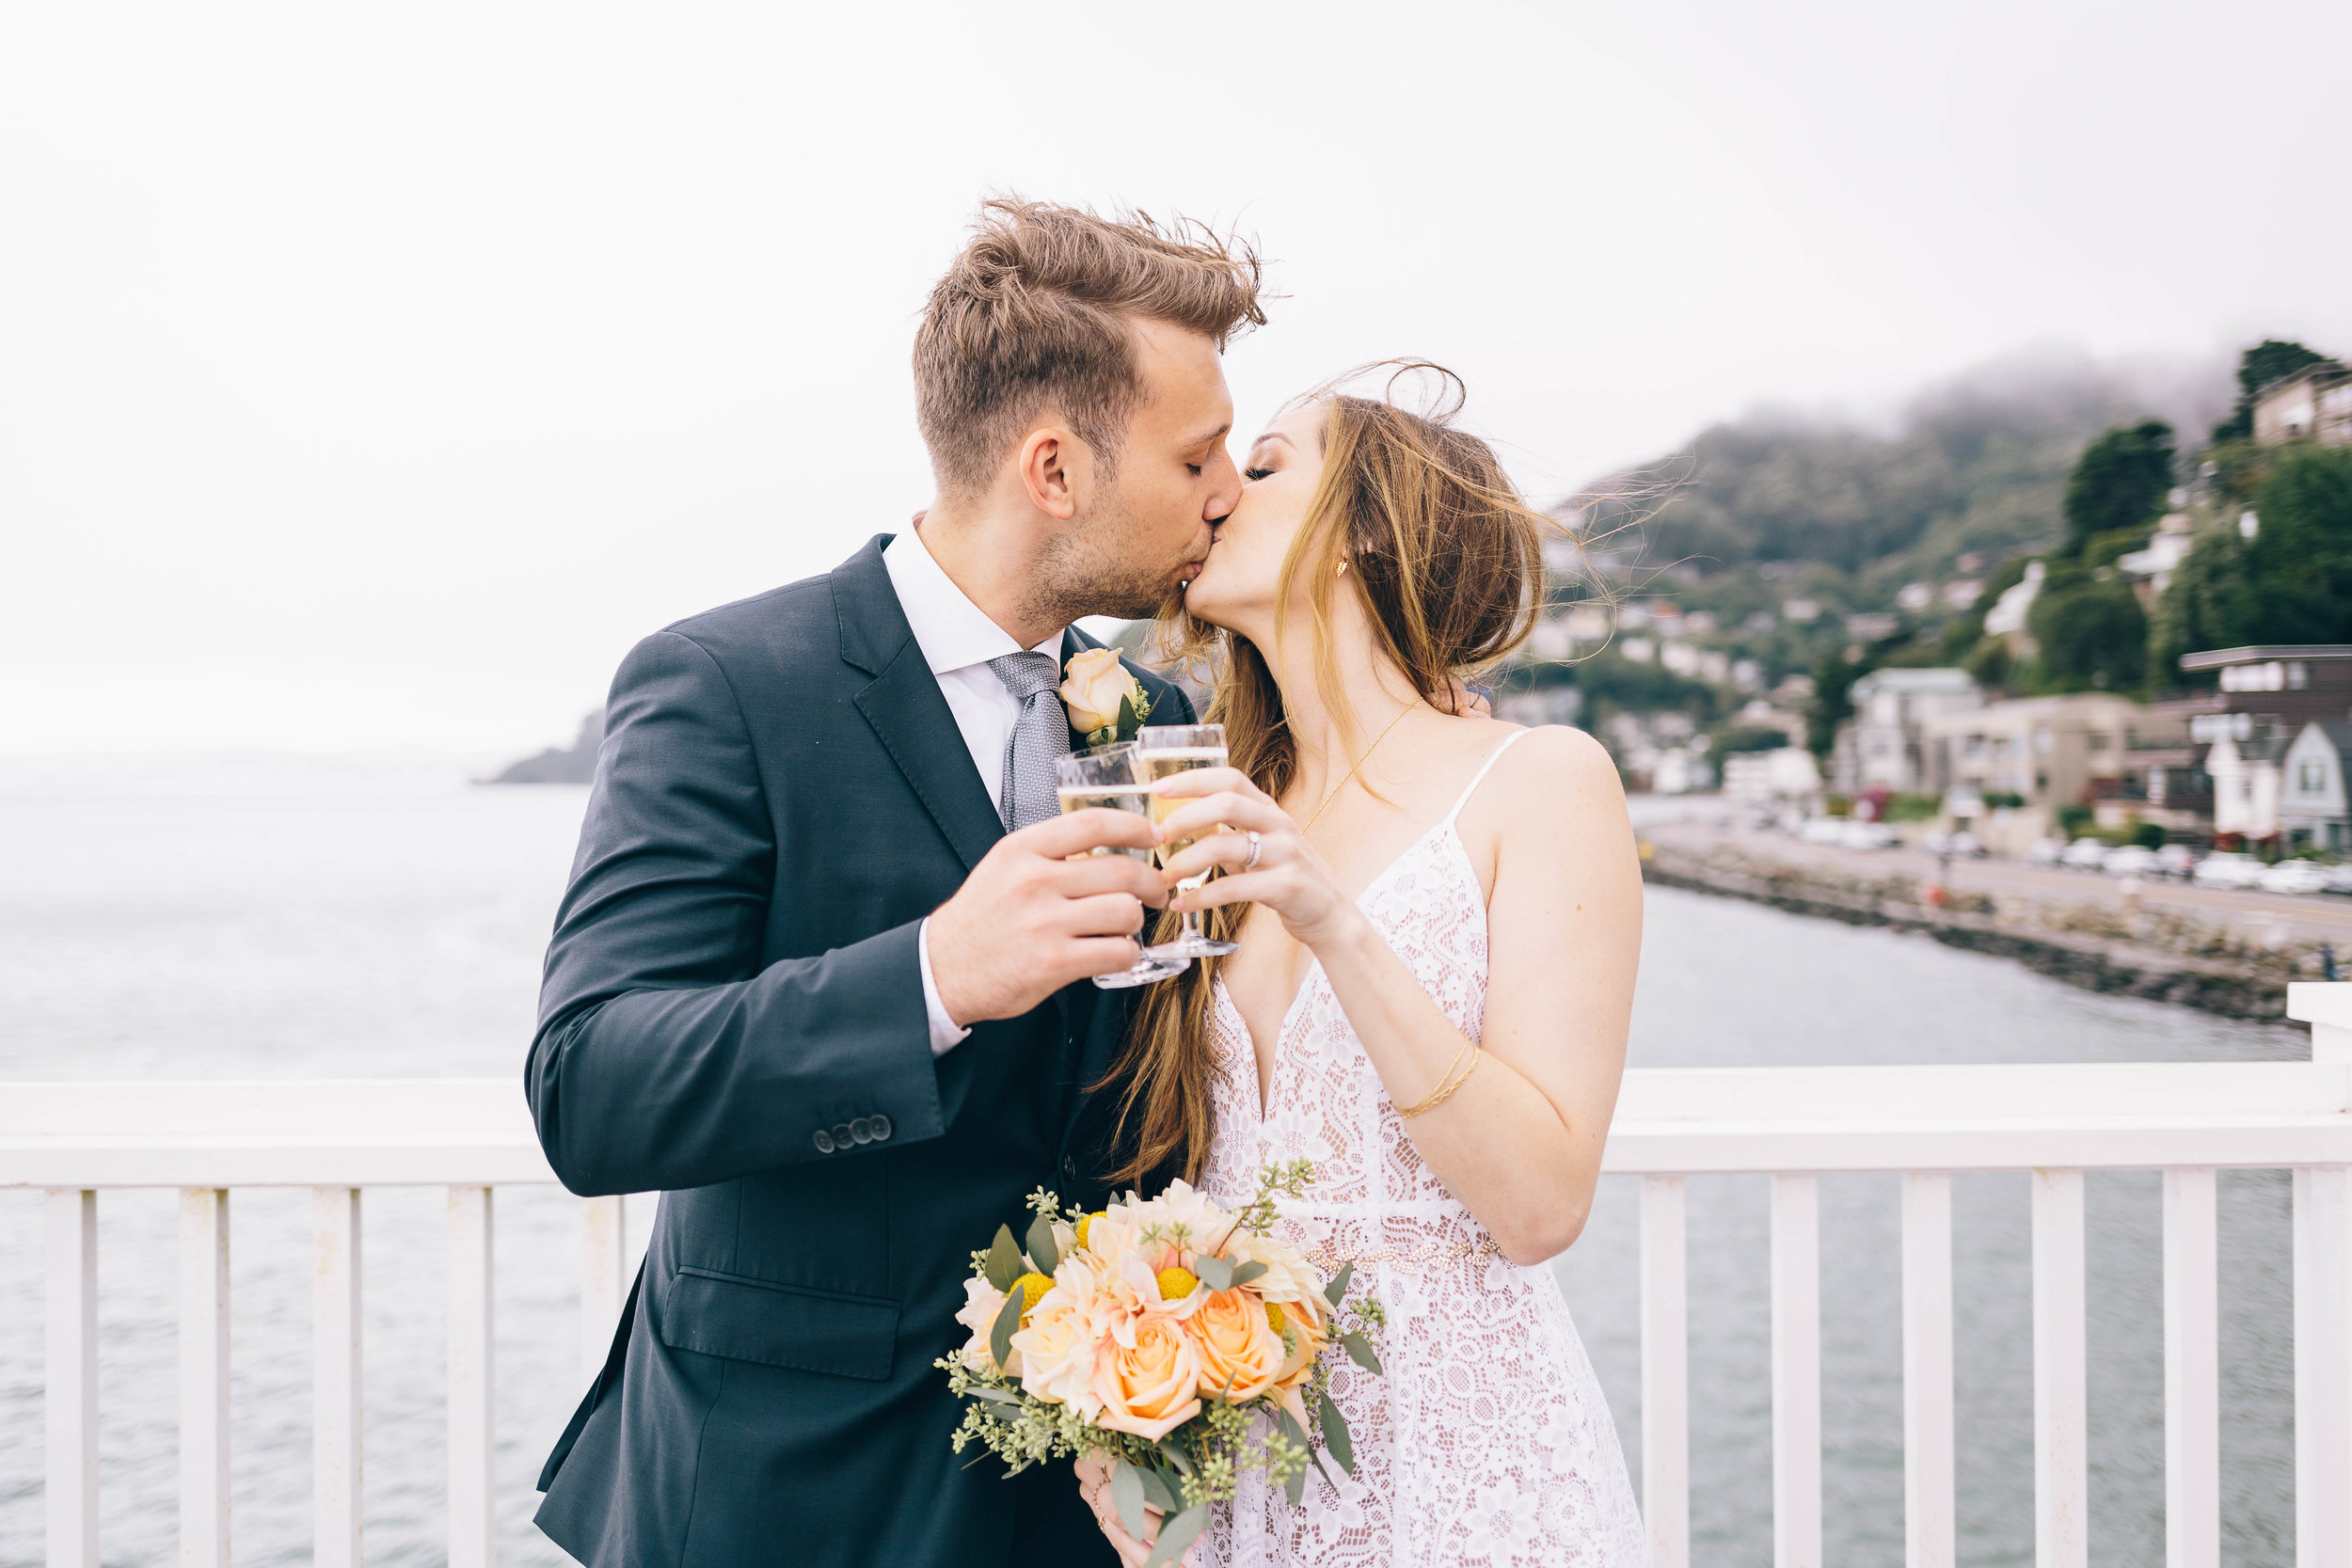 Sausalito Wedding at Ondine Events by JBJ Pictures - Photographer in Sausalito and Marin County - Engagment & Wedding Photography in San Francisco, Marin, Sonoma, and Napa (38).jpg